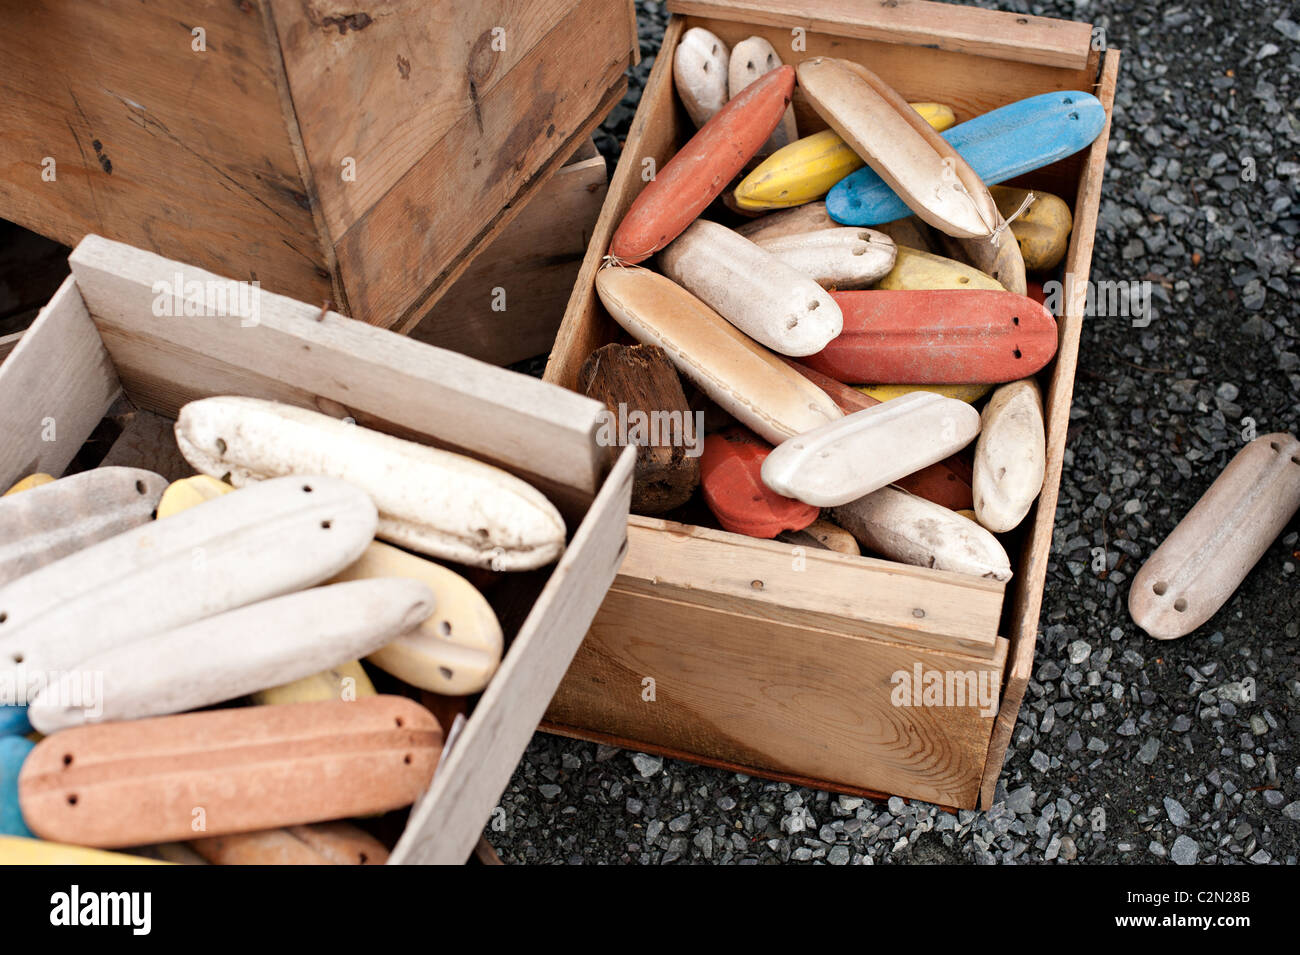 https://c8.alamy.com/comp/C2N28B/antique-fishing-floats-gathered-in-wooden-boxes-C2N28B.jpg